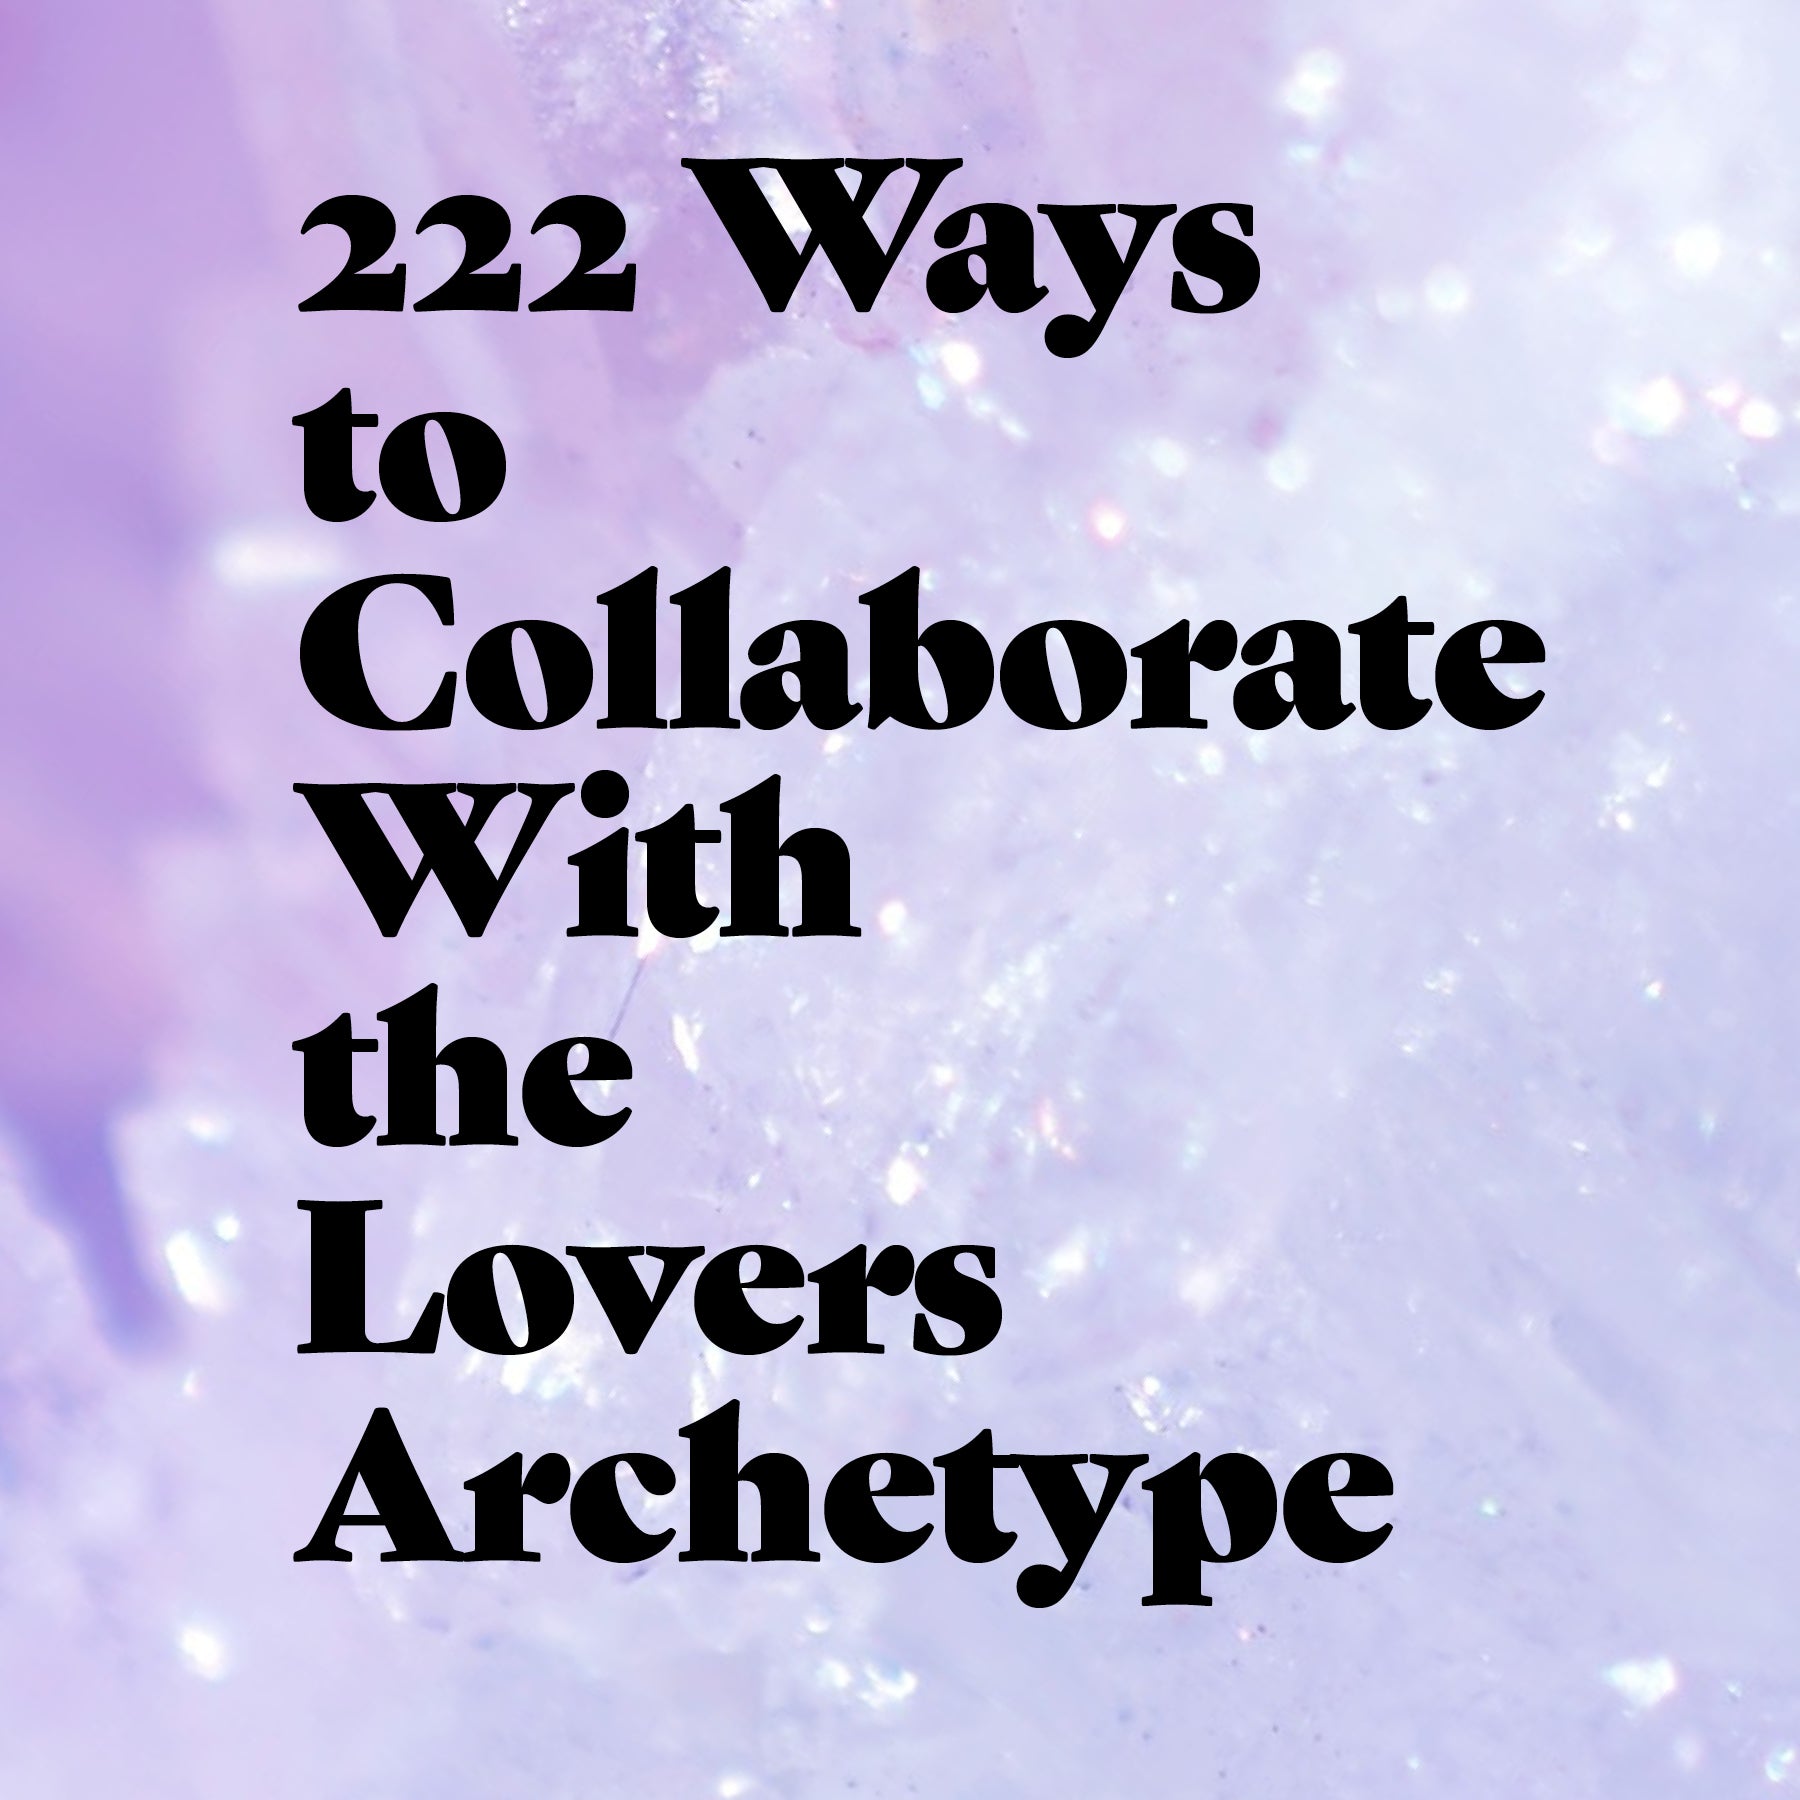 222 Ways to Collaborate with the Lovers Archetype Download